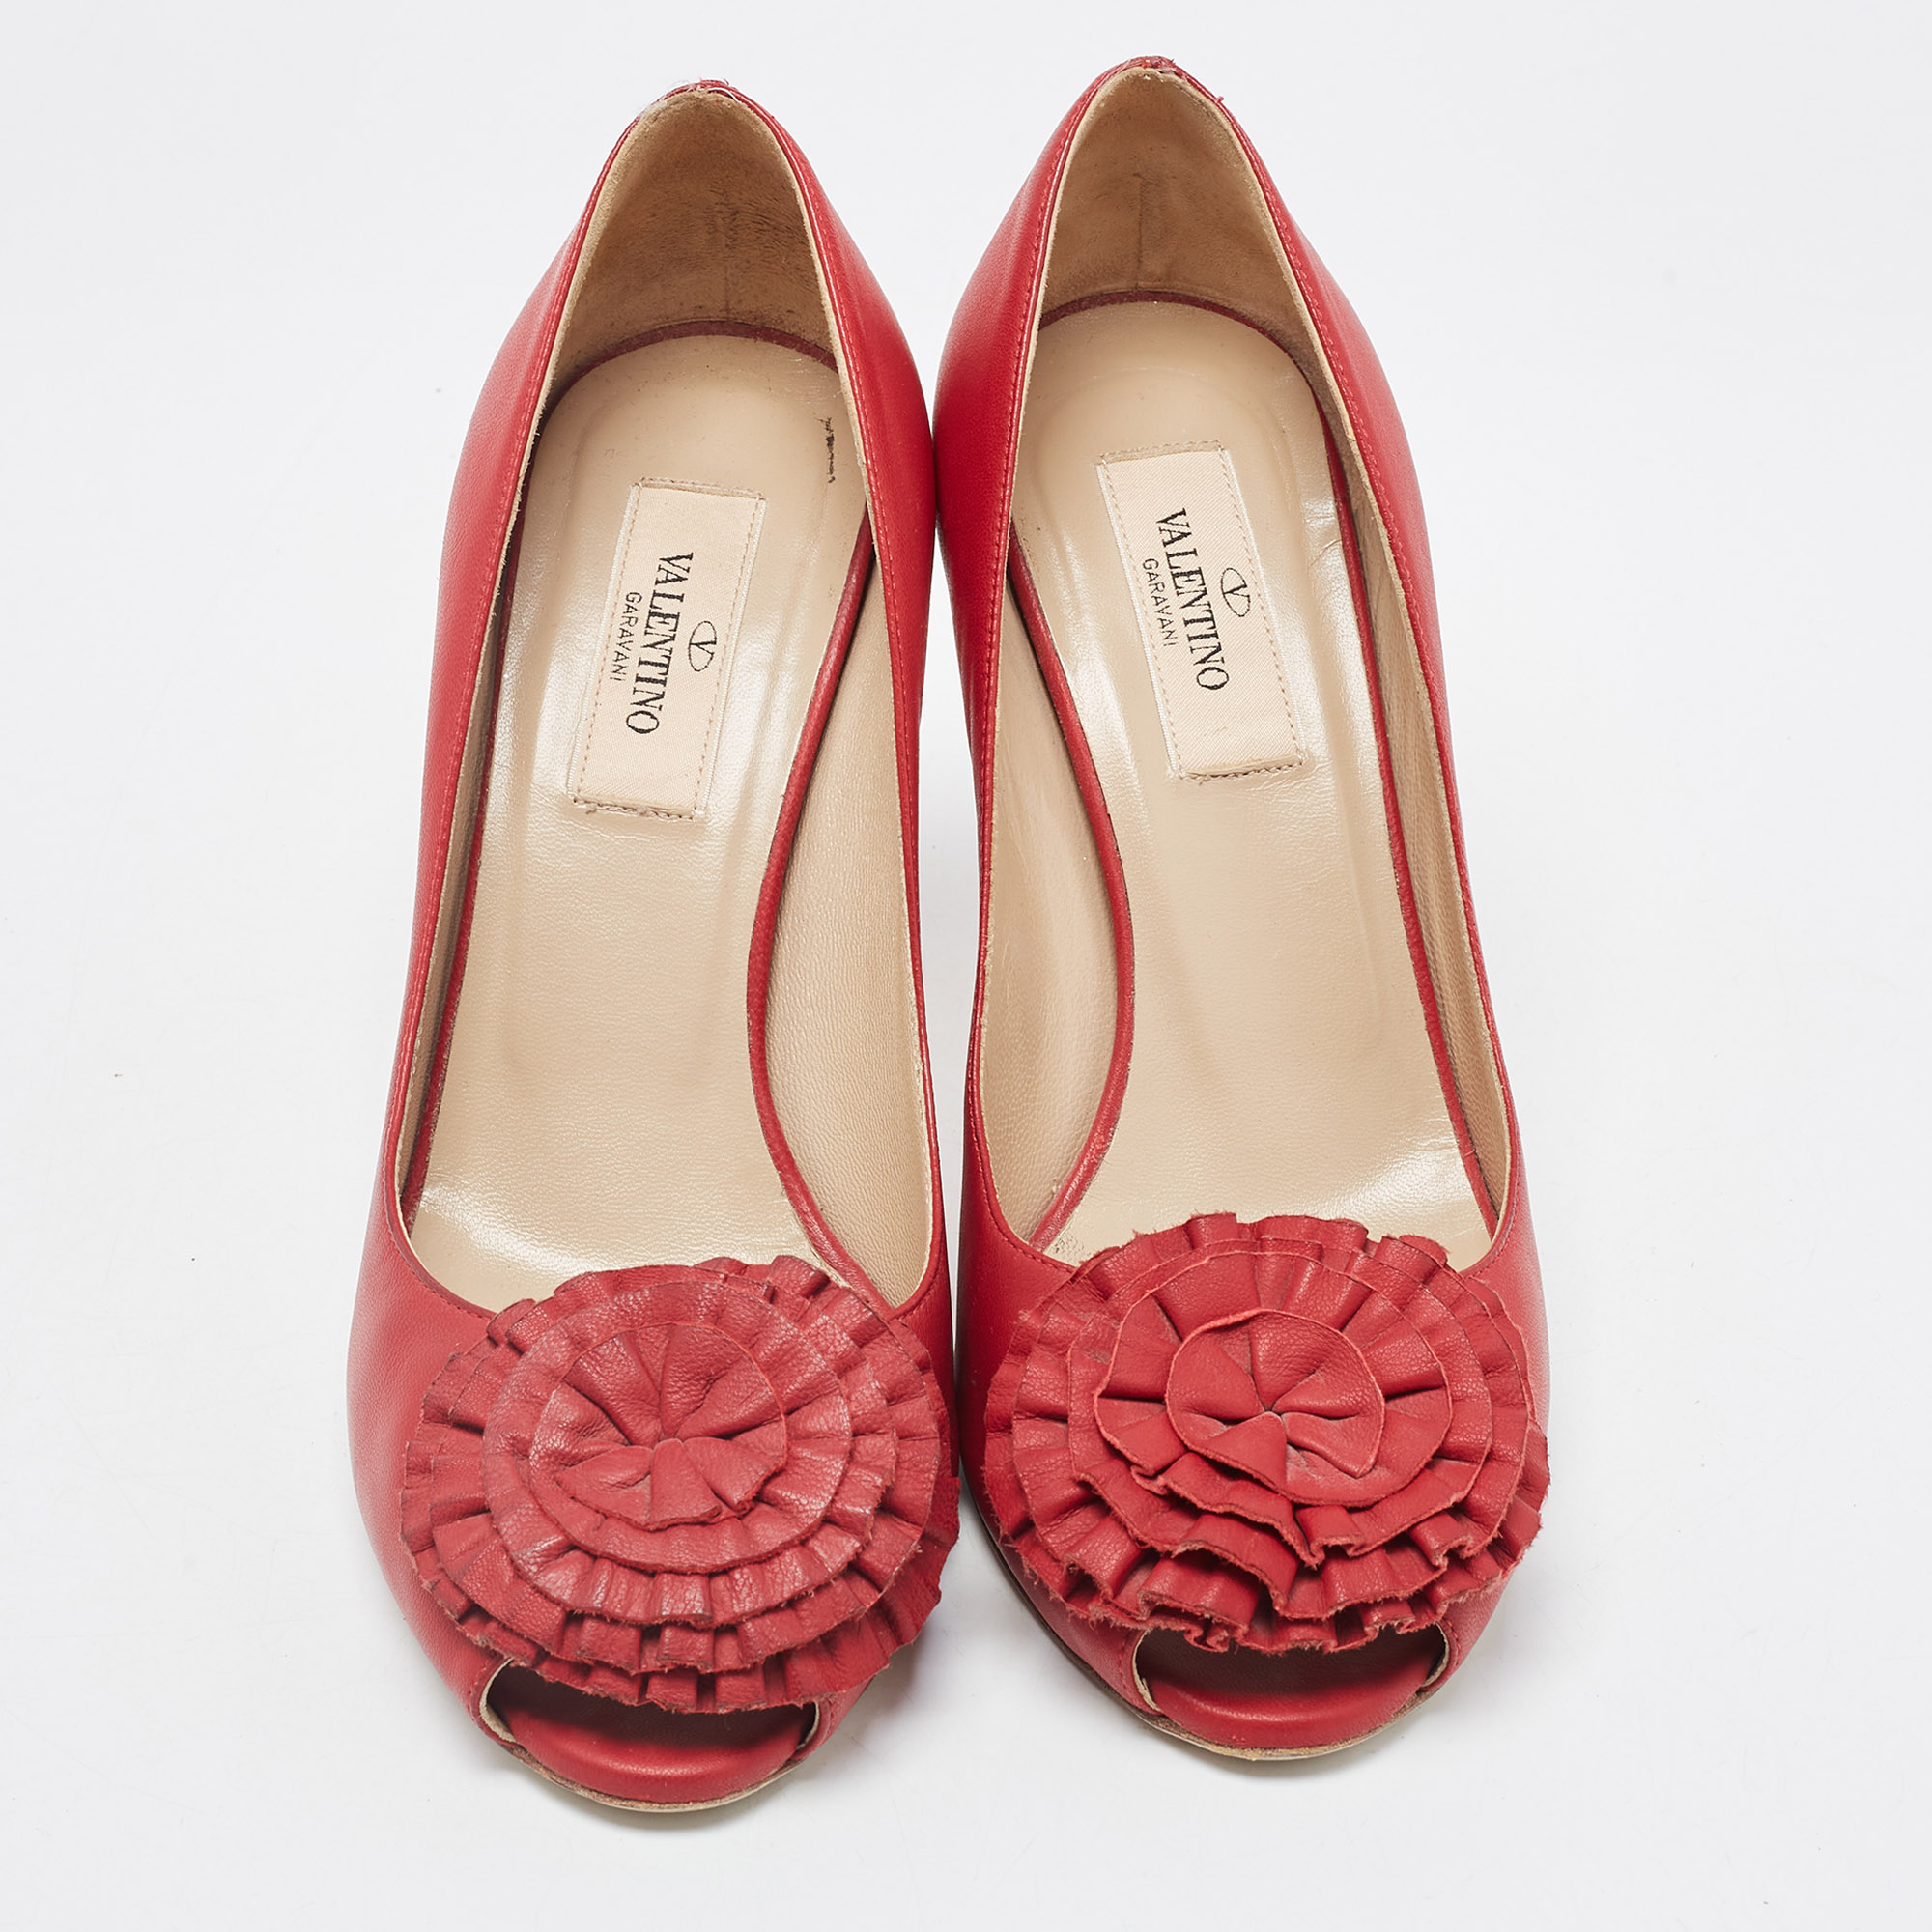 Valentino Red Leather Floral Peep Toe Pumps Size 37